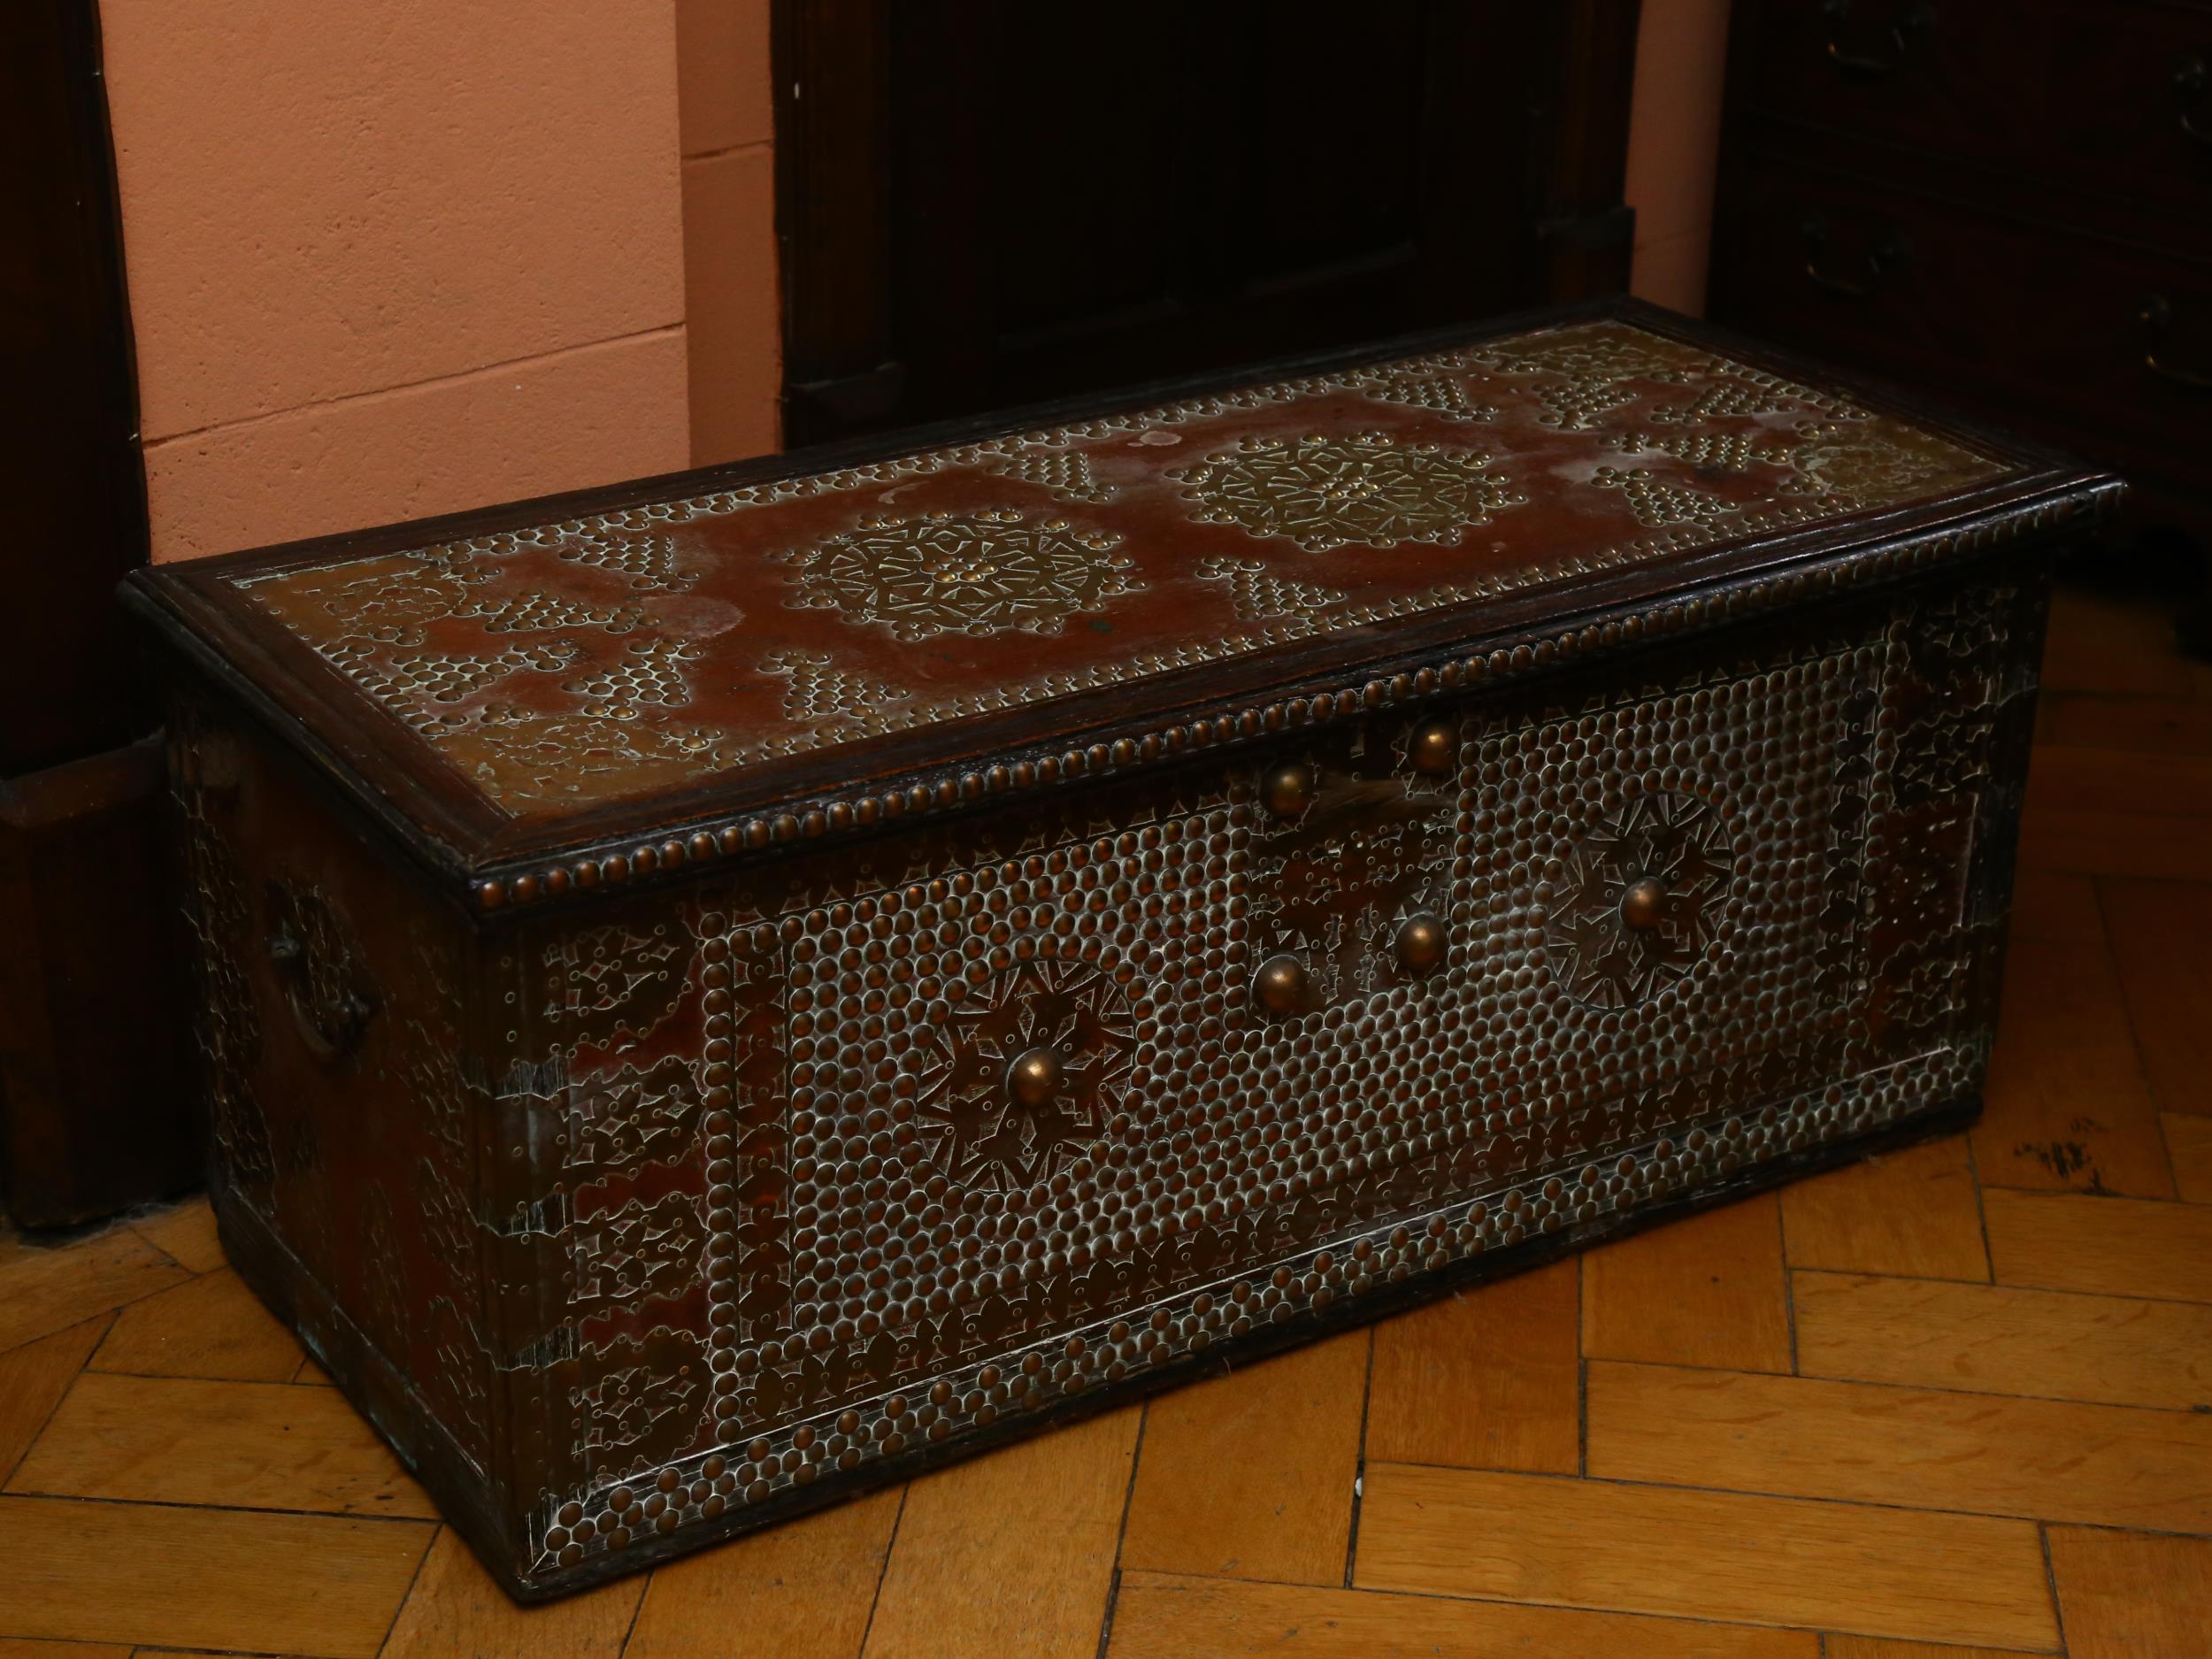 18th century Continental hardwood chest, with allover brass-studded decoration and applied pierced